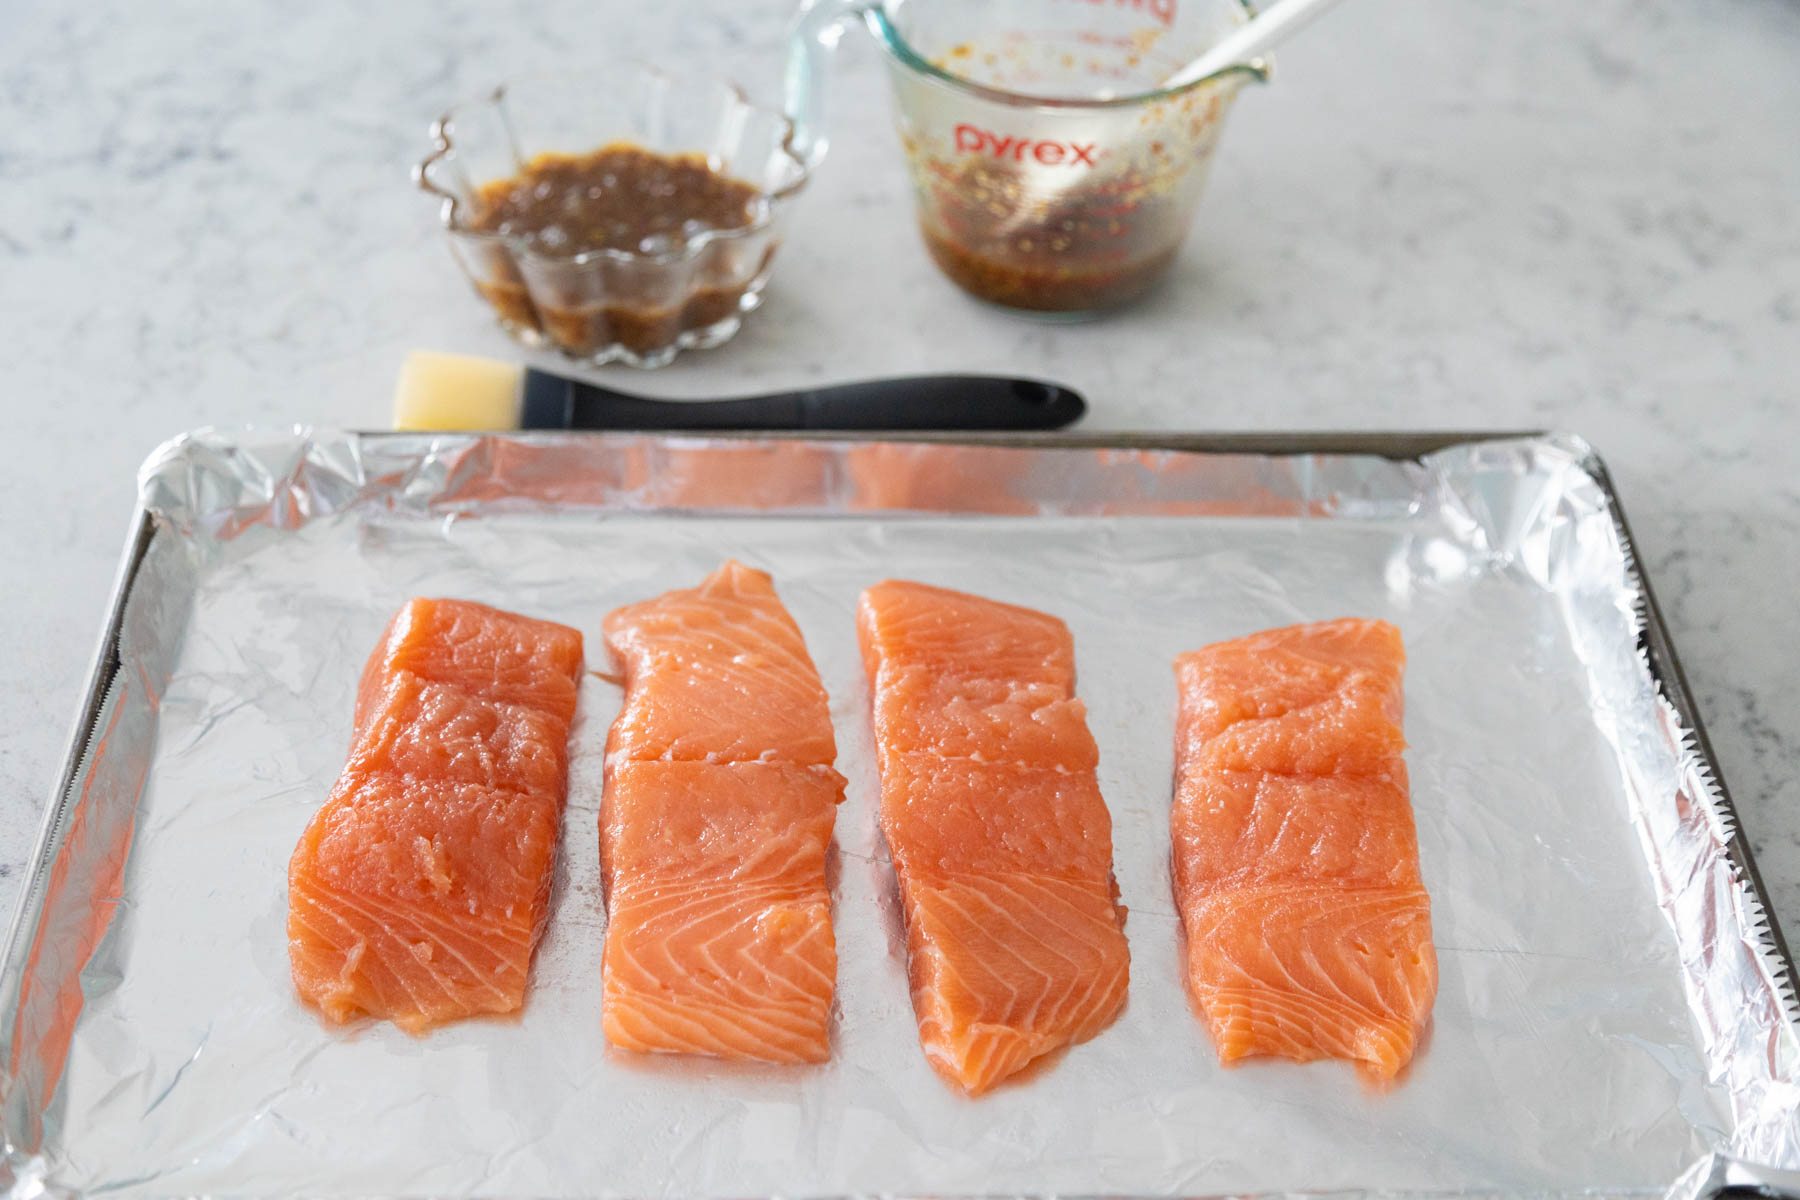 The four salmon filets are lined up on a baking pan ready to be glazed.